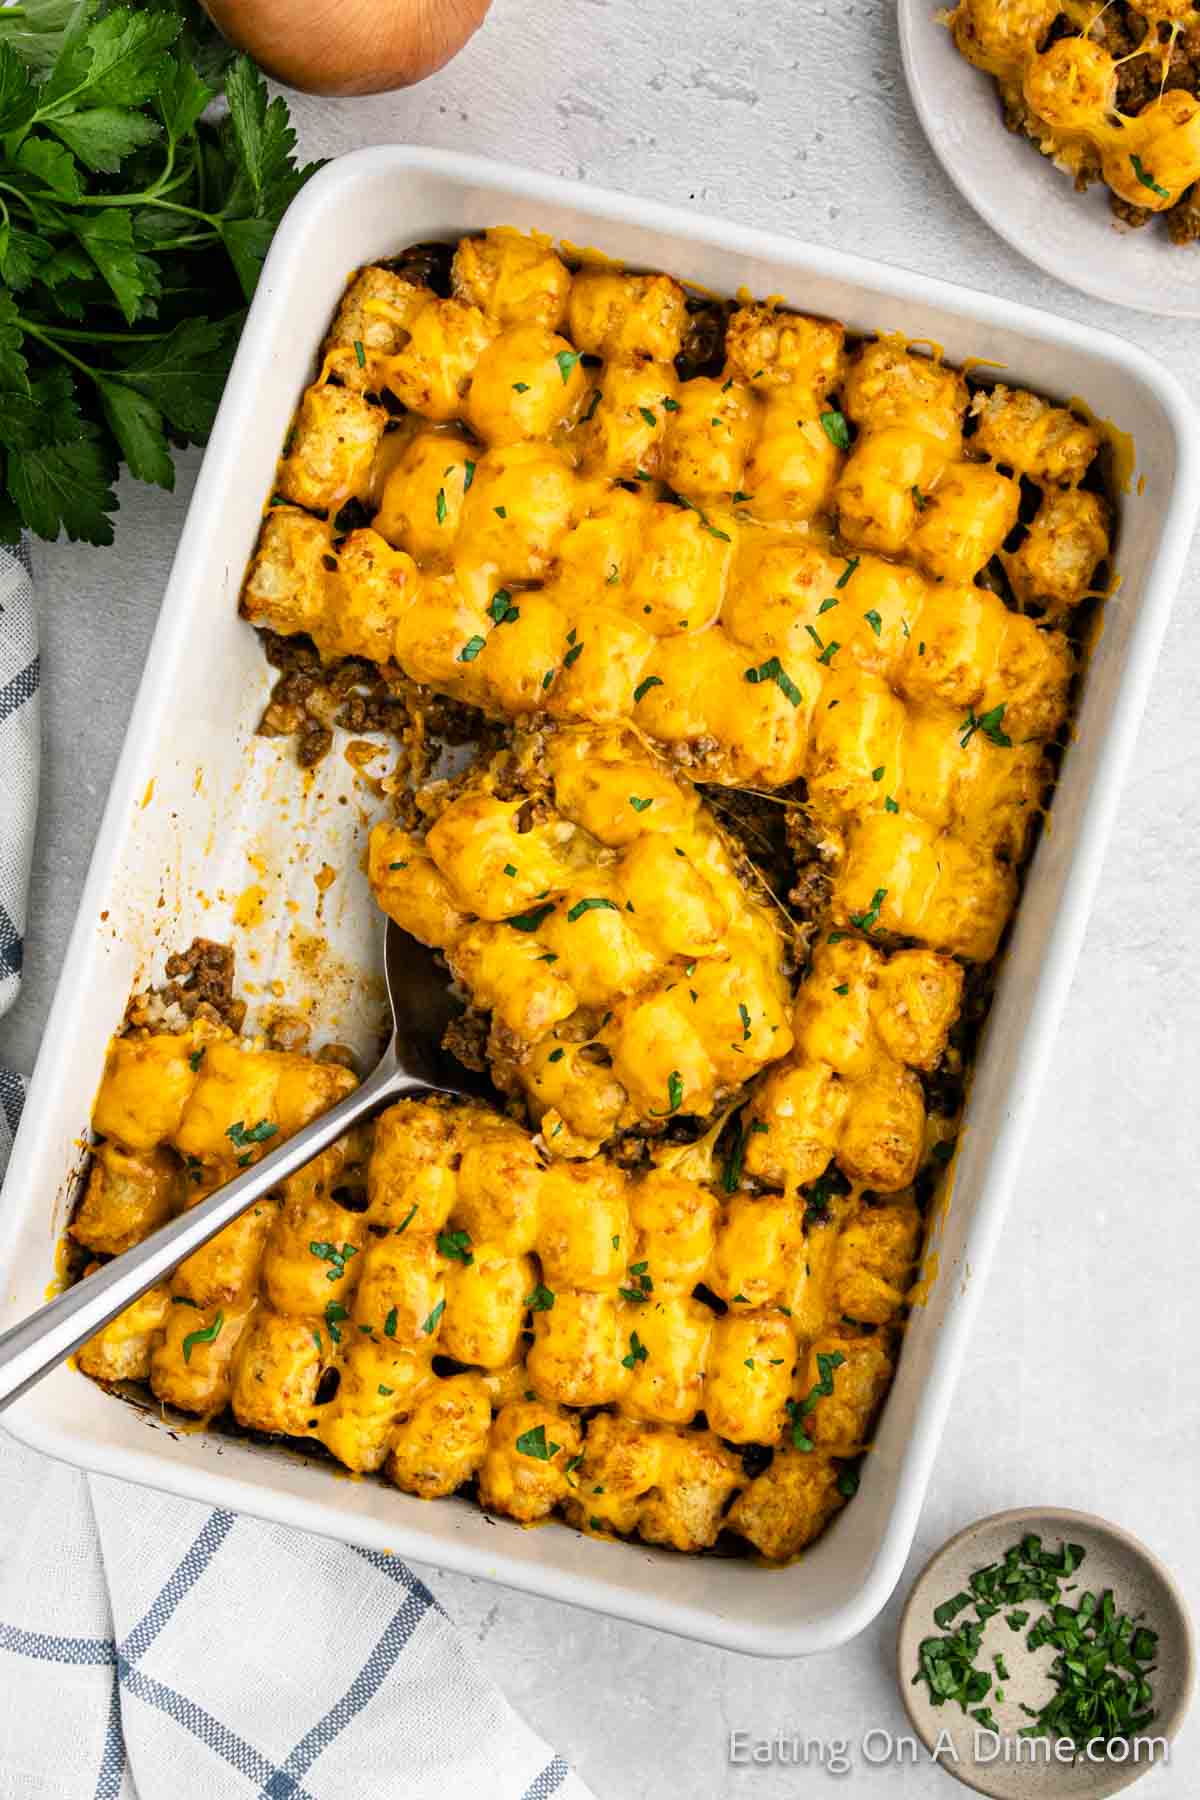 Cheeseburger tator tot casserole in a baking dish with a serving on the spatula